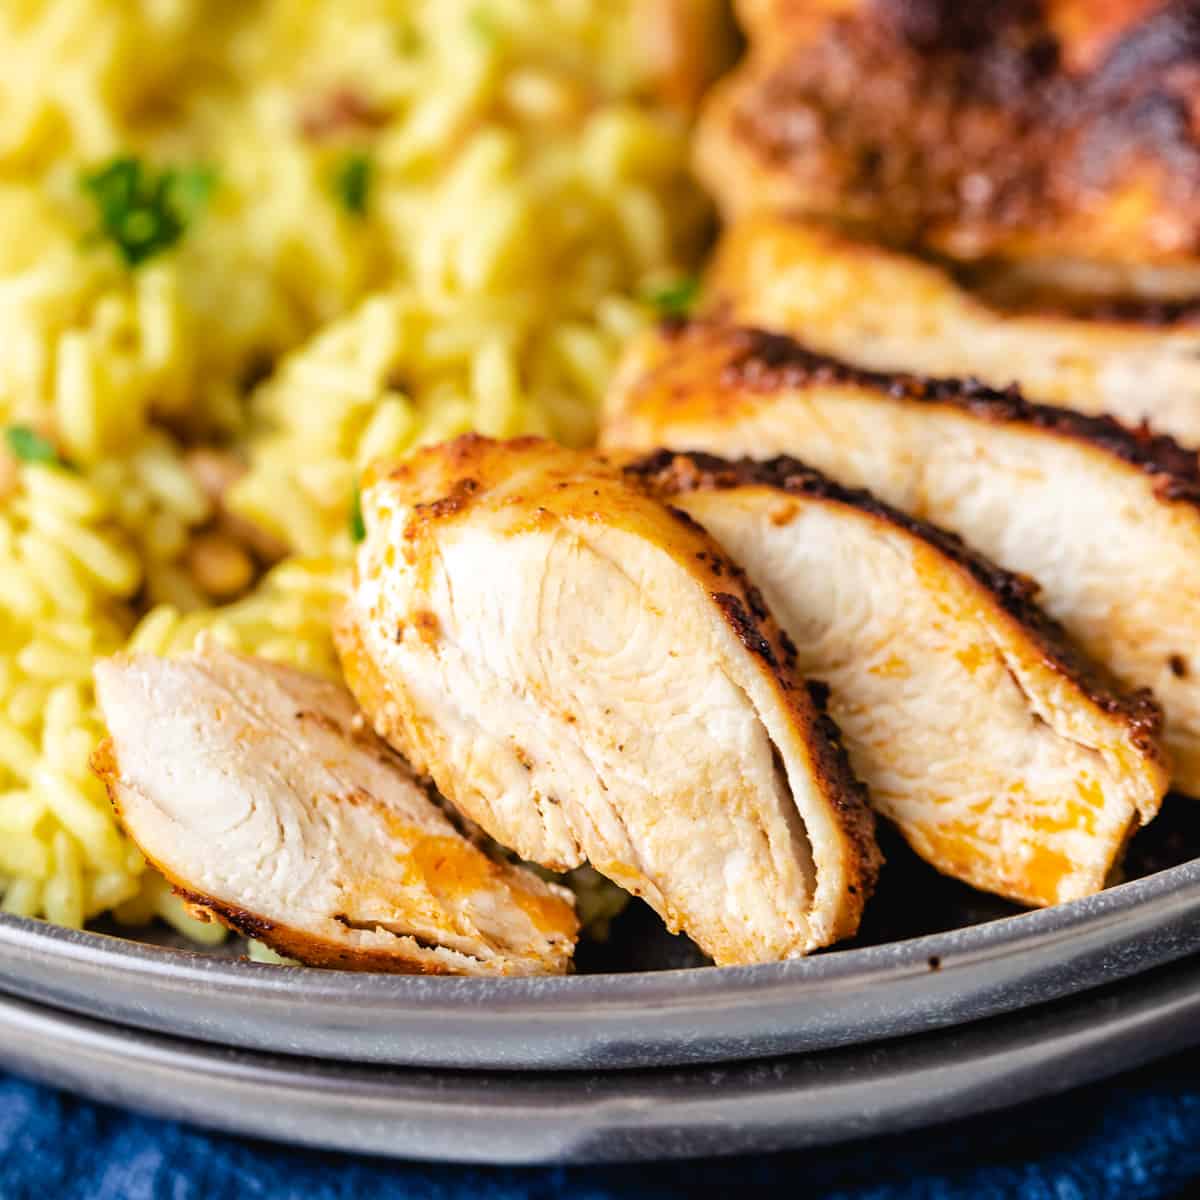 Oven baked chicken breast recipe